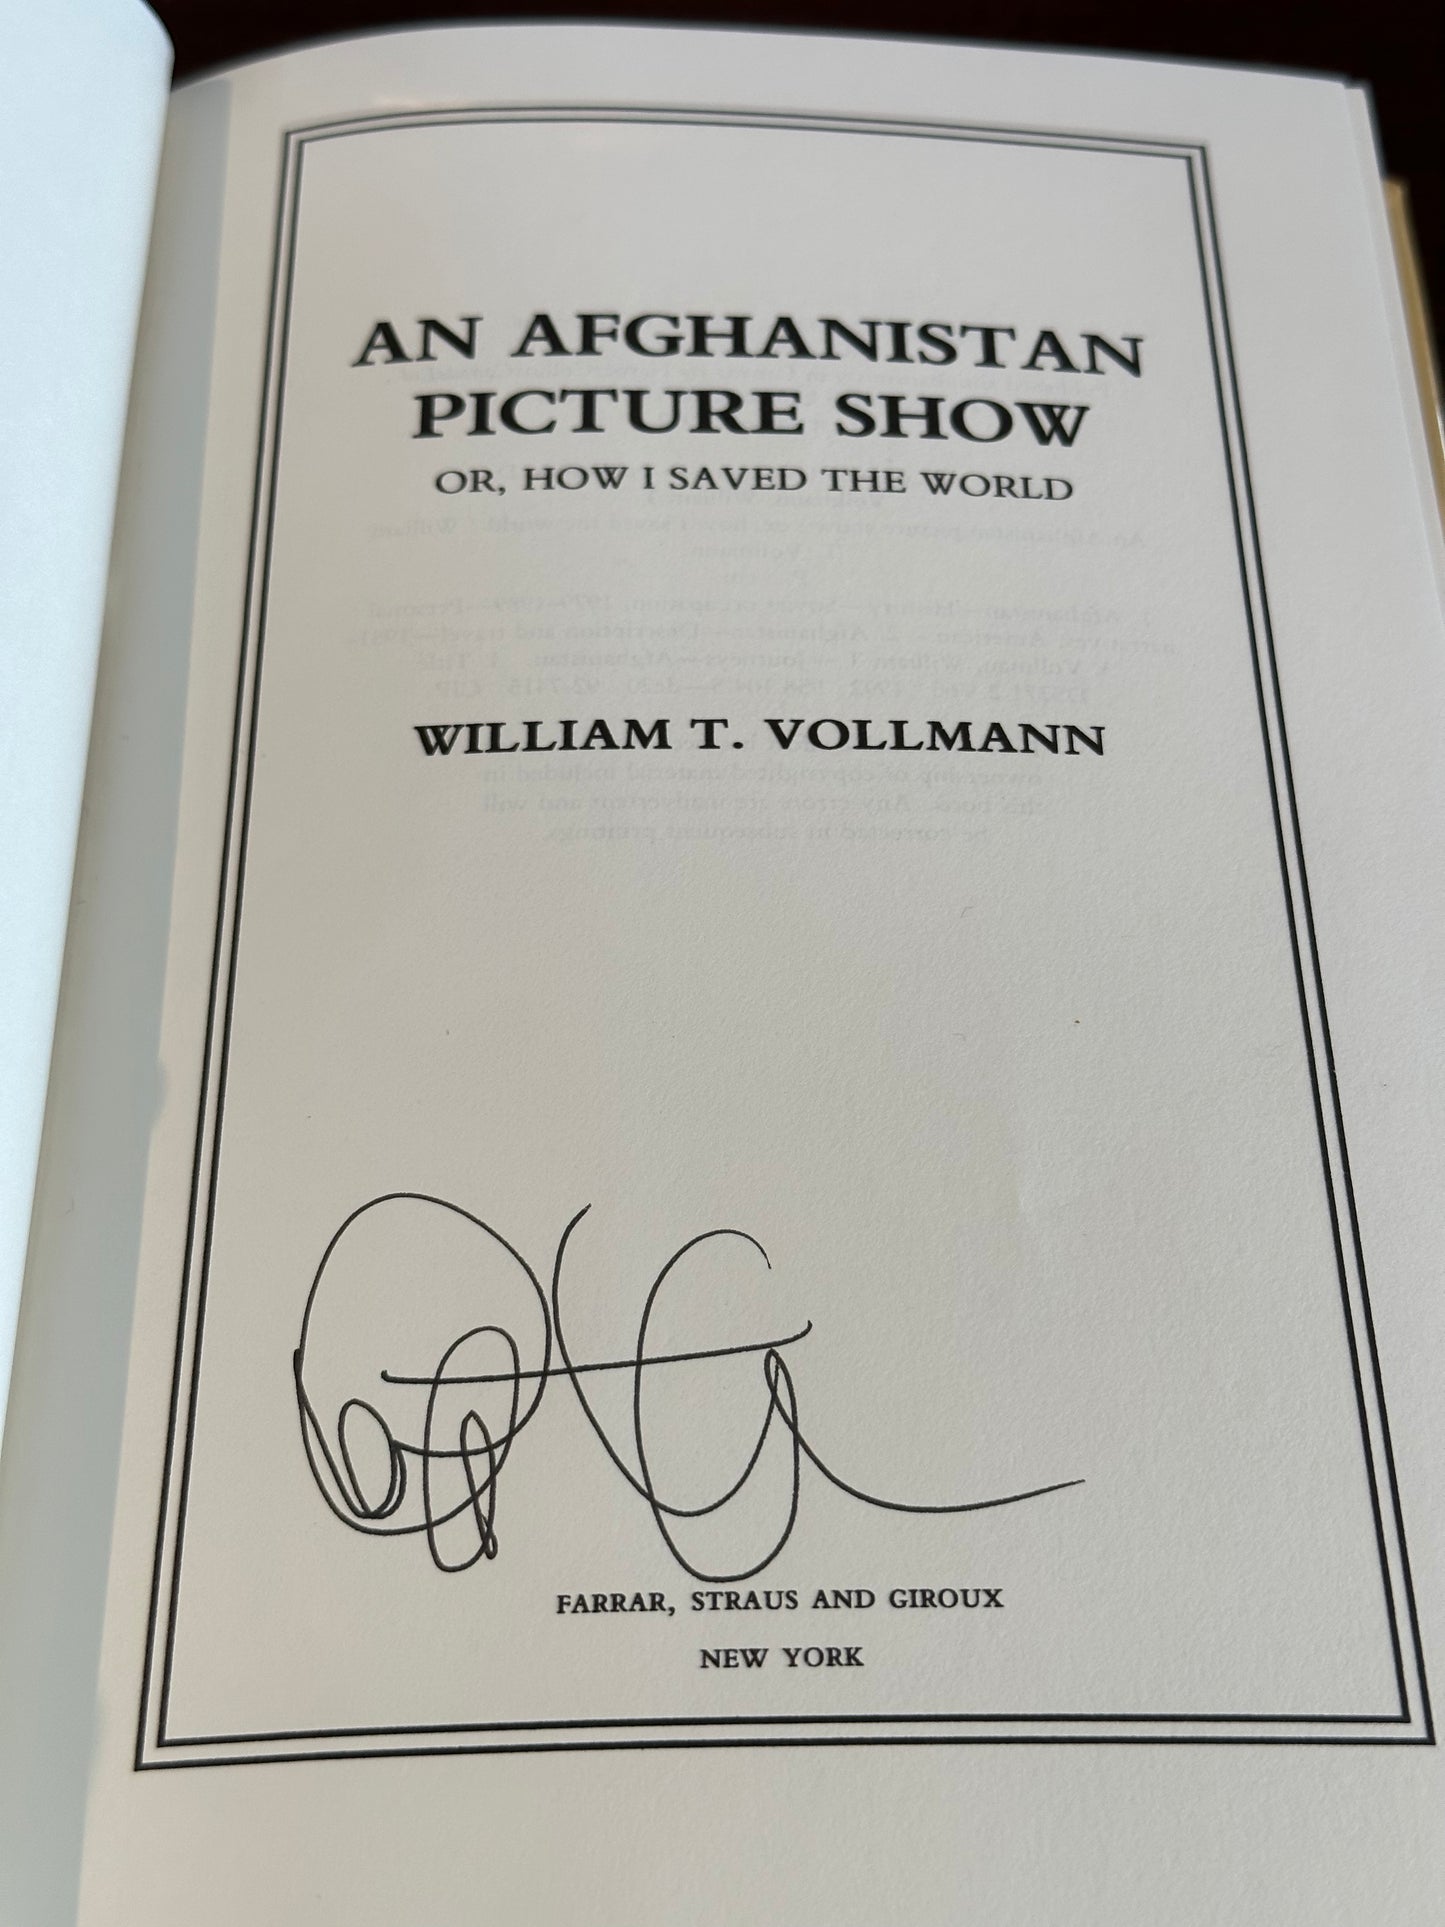 An Afghanistan Picture Show by William T. Vollmann (Signed)